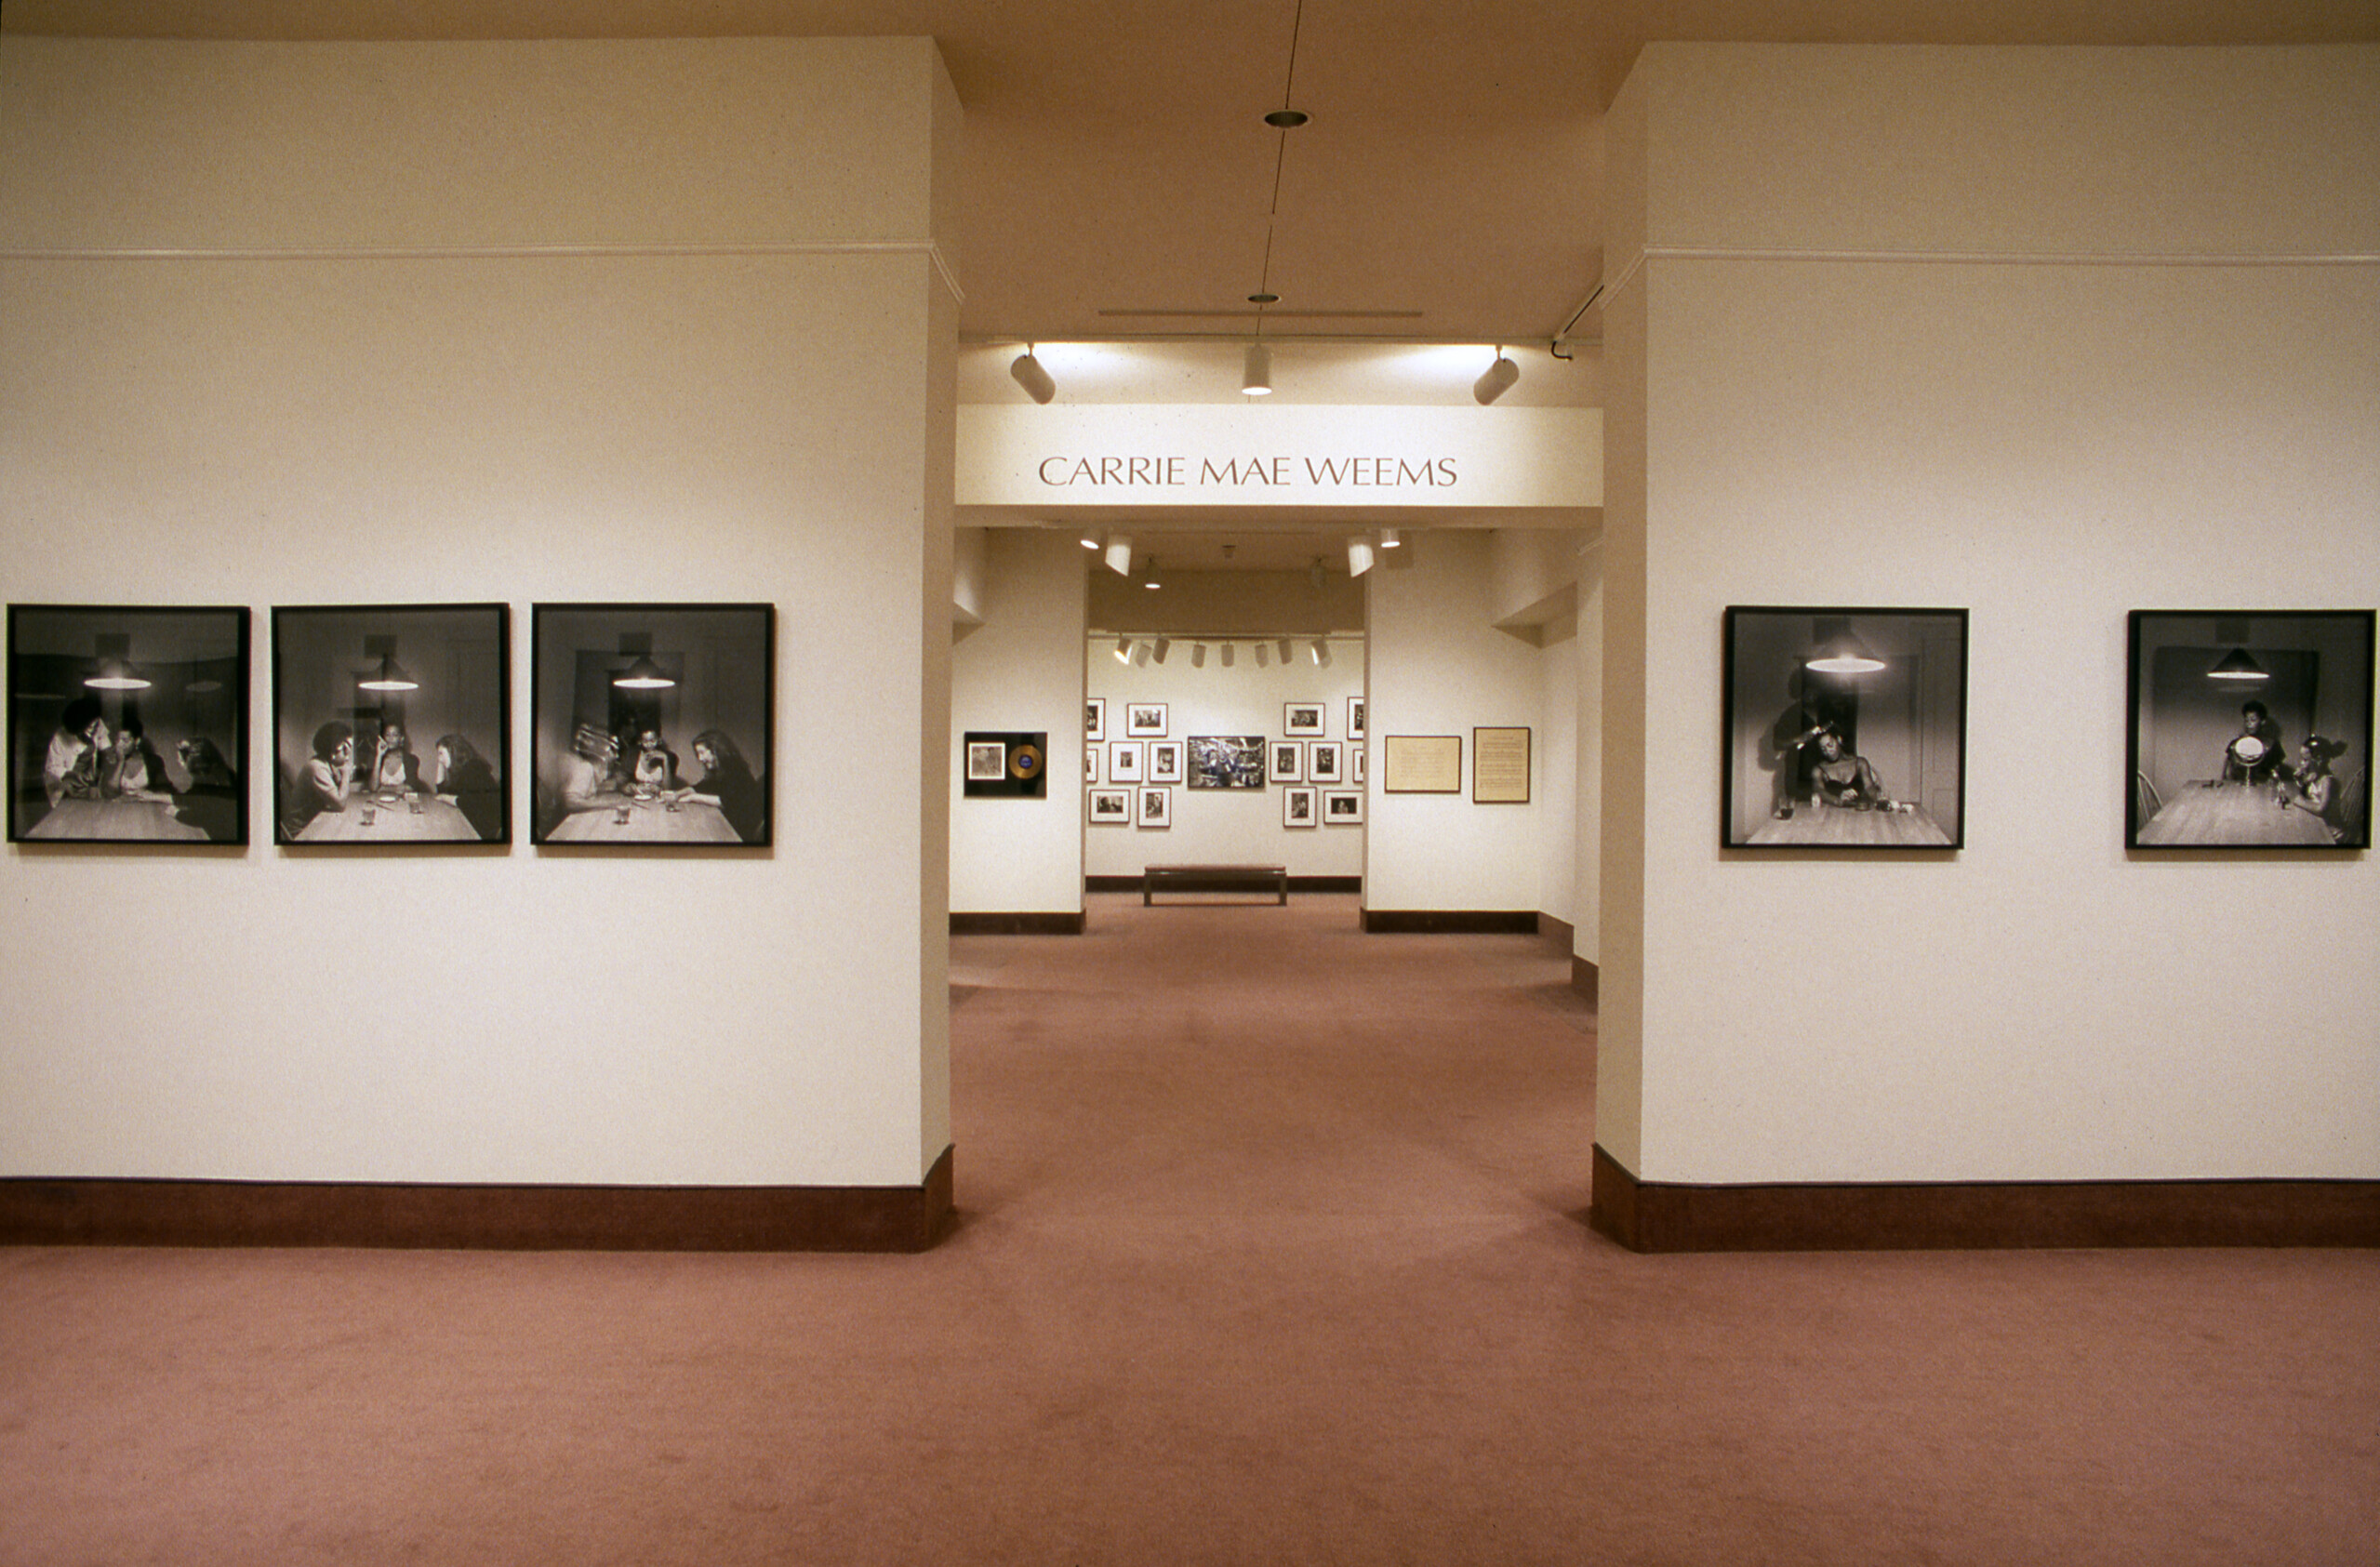 A view of a gallery space. A sequence of photographs of a woman with a dark skin tone sitting around a kitchen table is hanging on the walls. Behind the walls in the back room, it says 